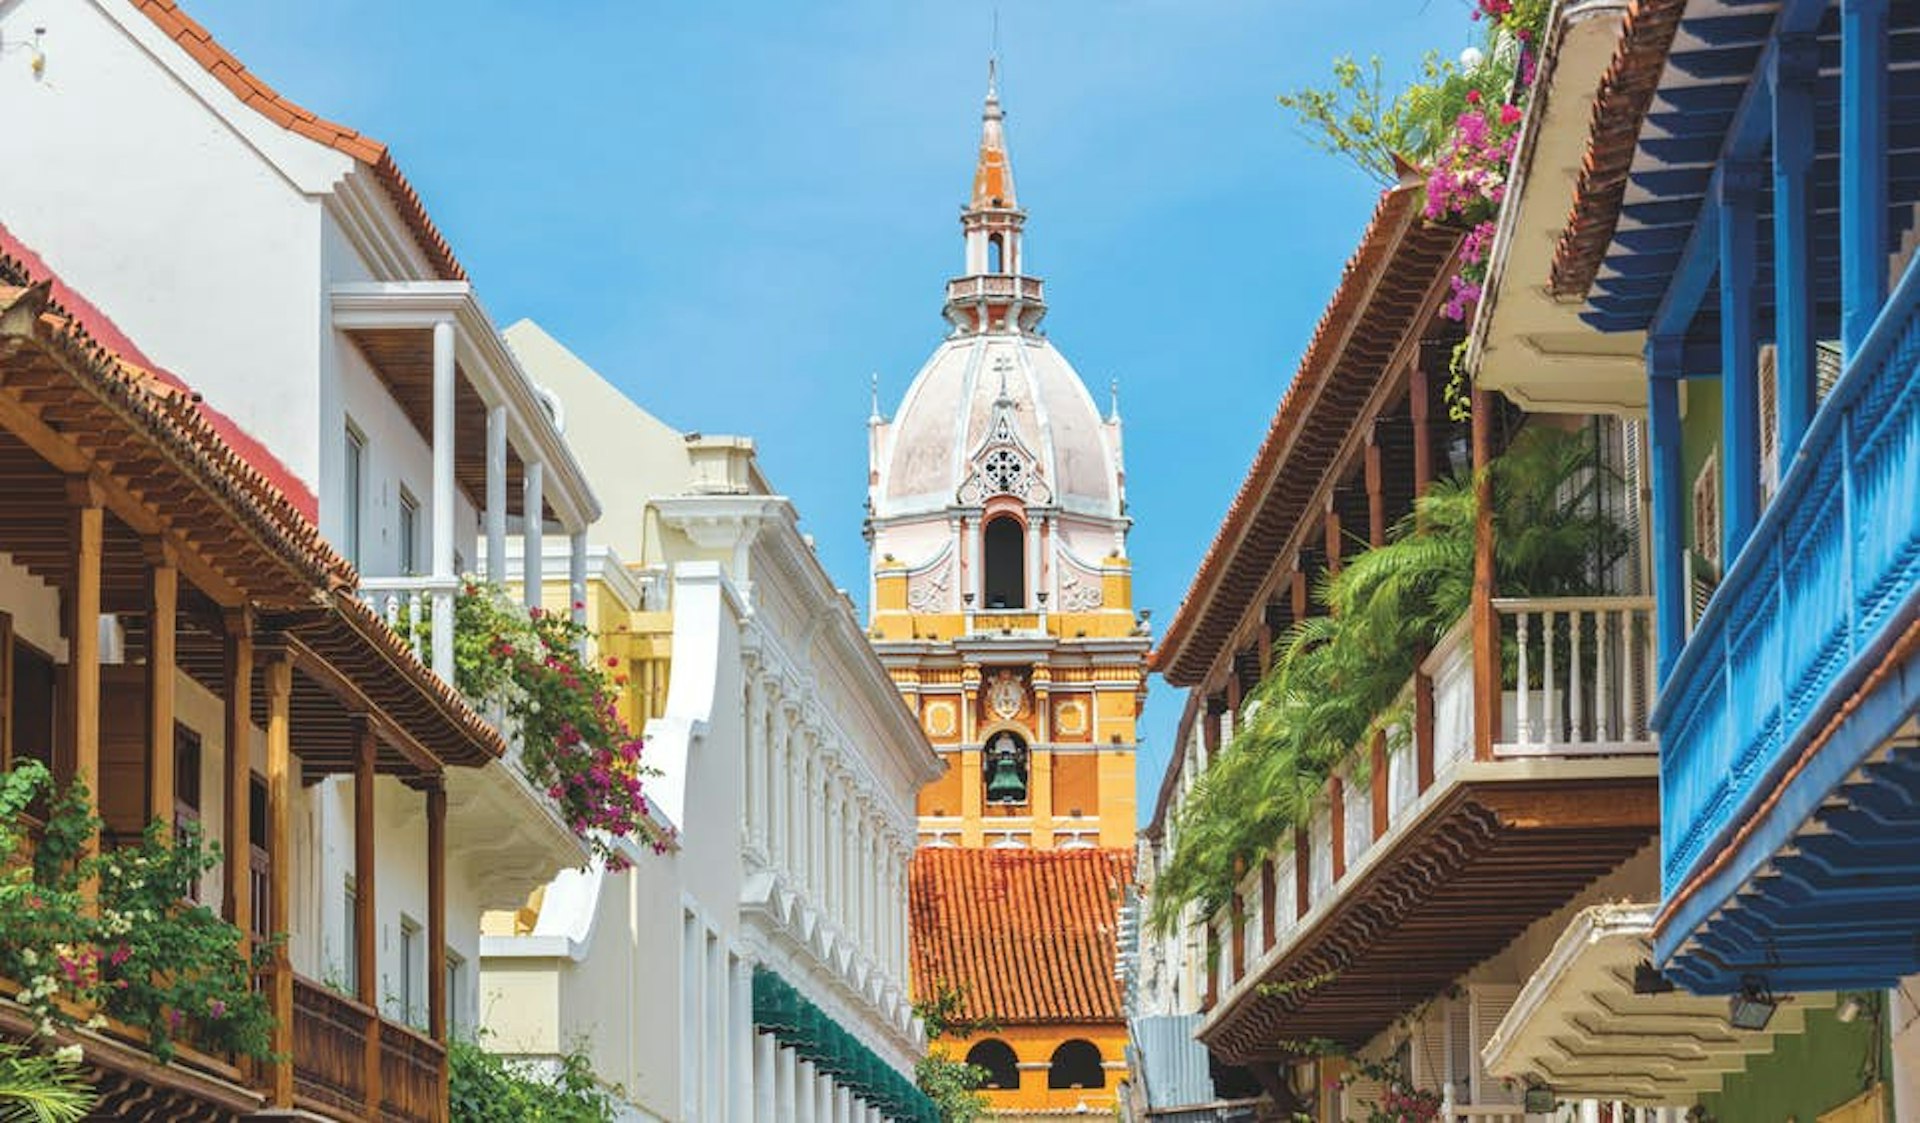 Cartagena, a city on Colombia’s Caribbean coast, is a treasure trove of colonial architecture © DC_Colombia / Getty Images